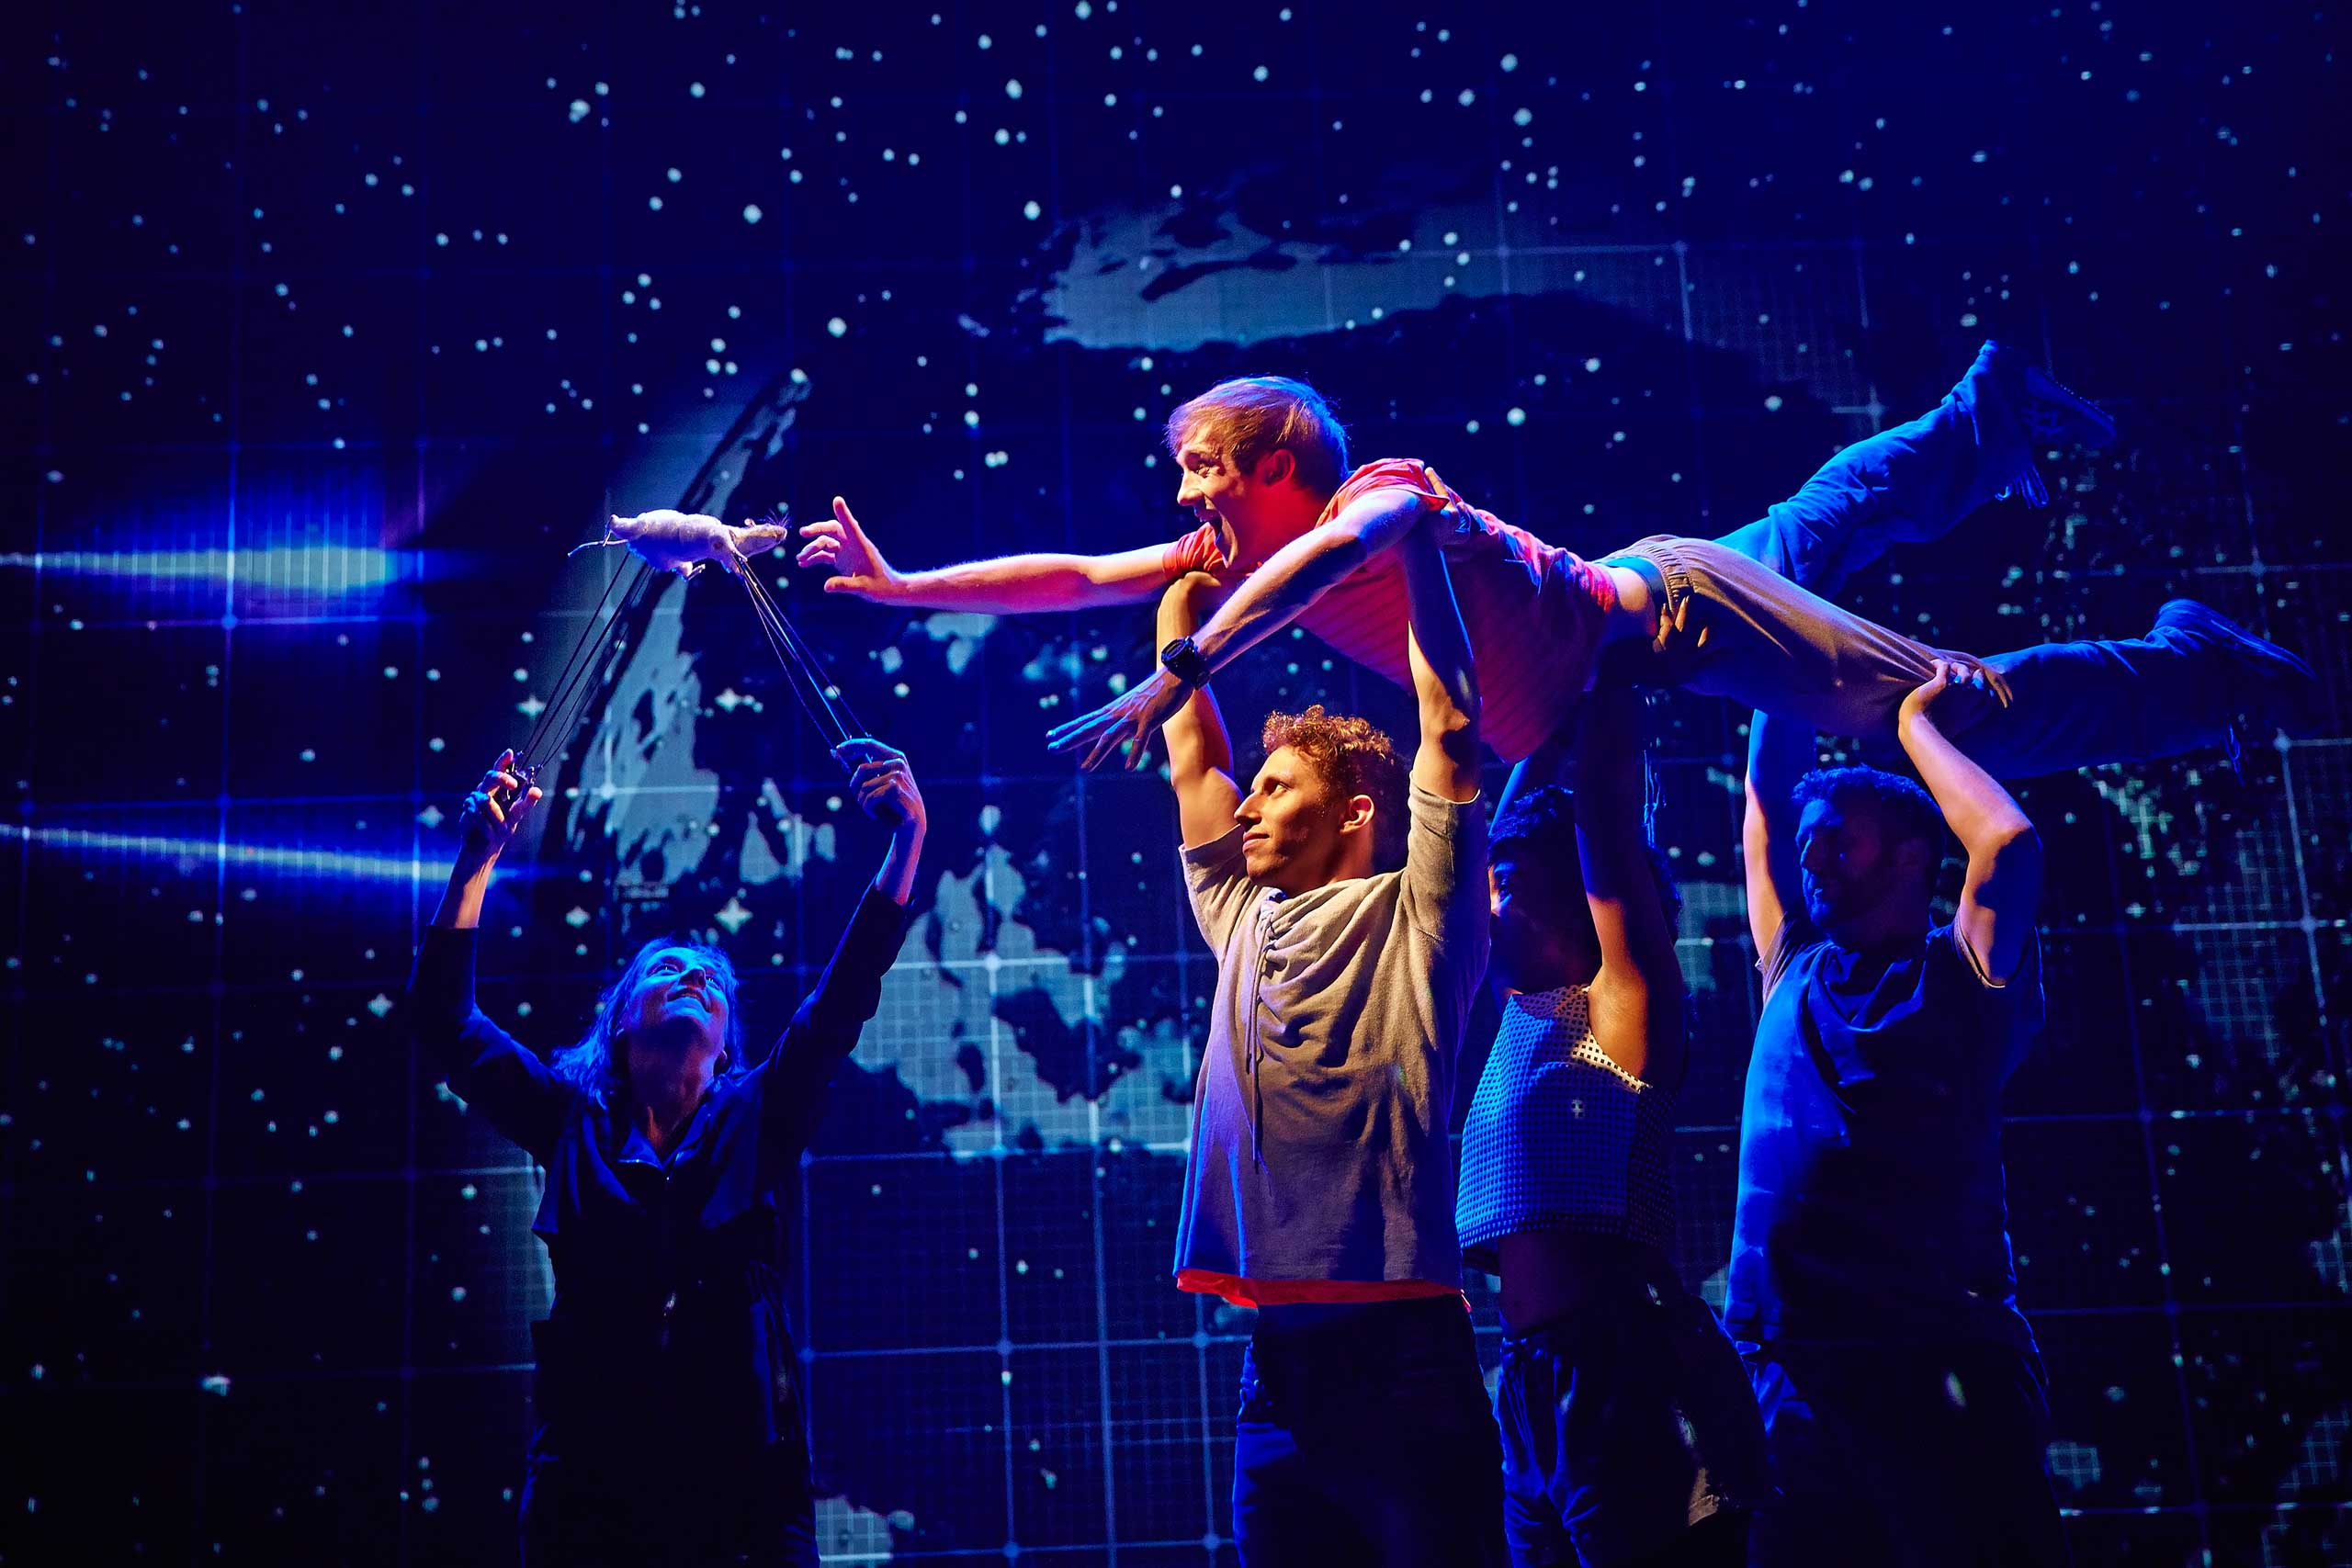 This image released by Boneau/Bryan-Brown shows the cast during a performance of “The Curious Incident of the Dog in the Night-Time," in London. (Brinkhoff-Moegenburg—AP)